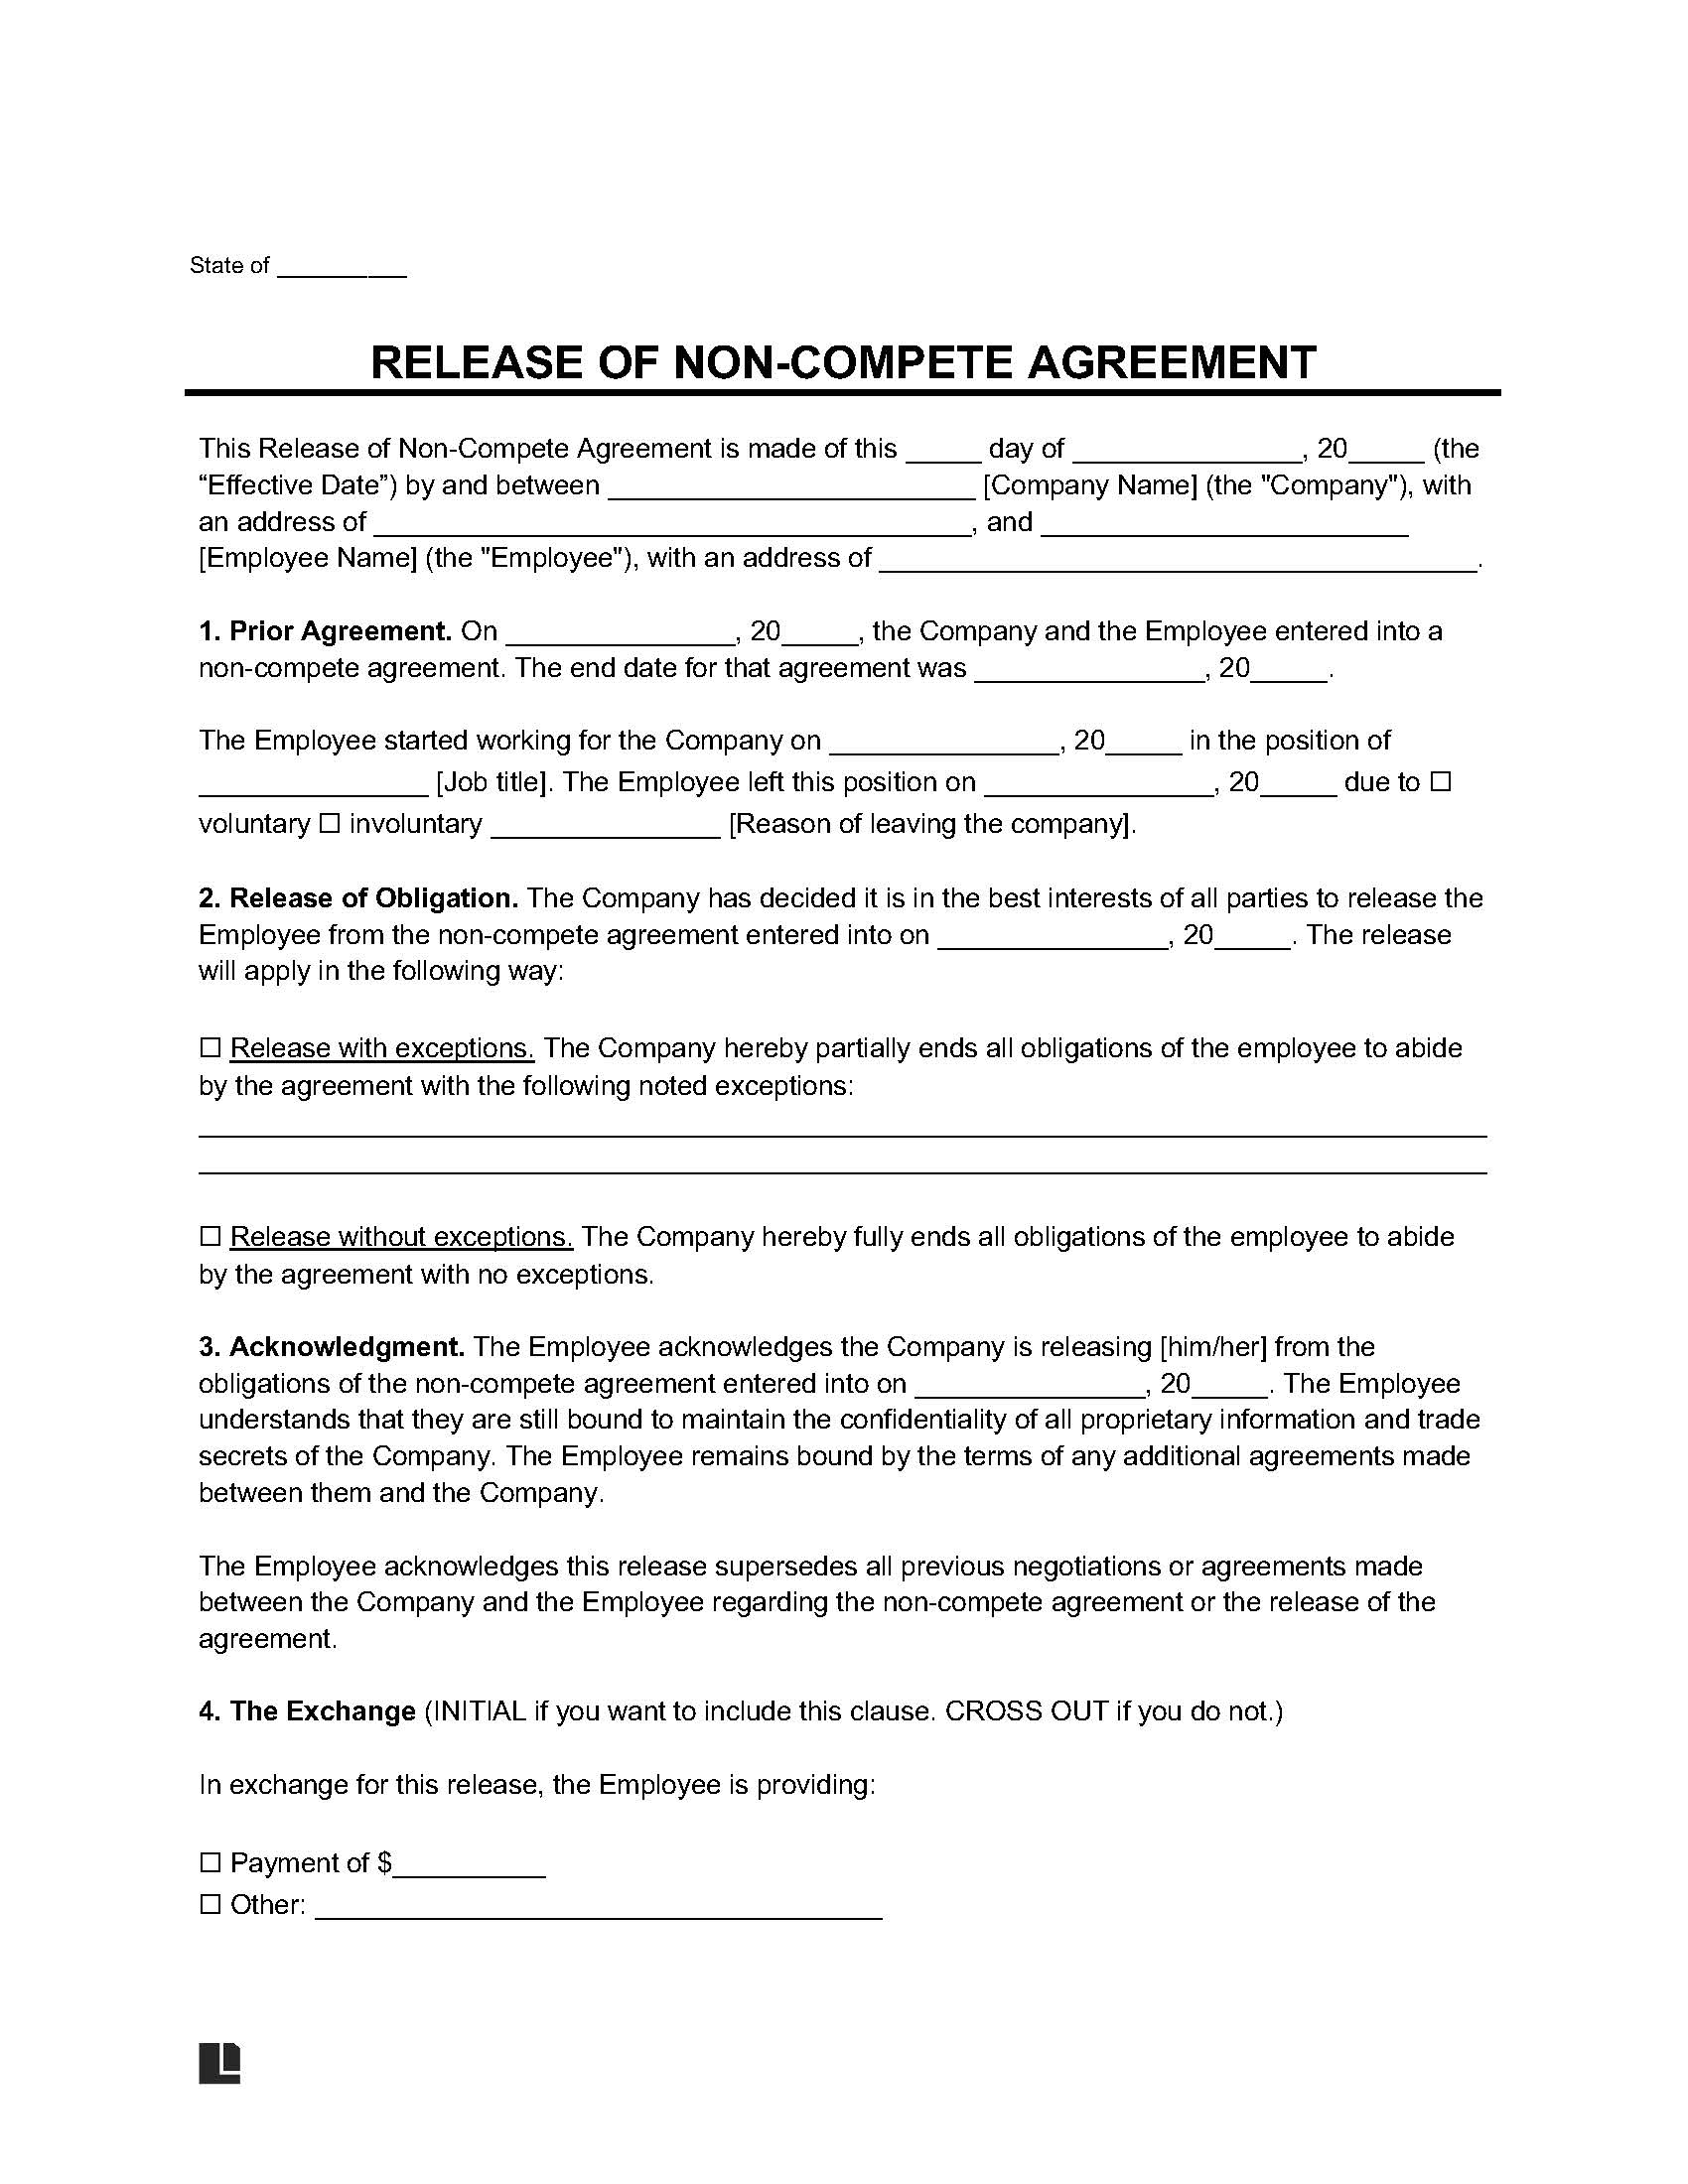 Release of Non-compete Agreement